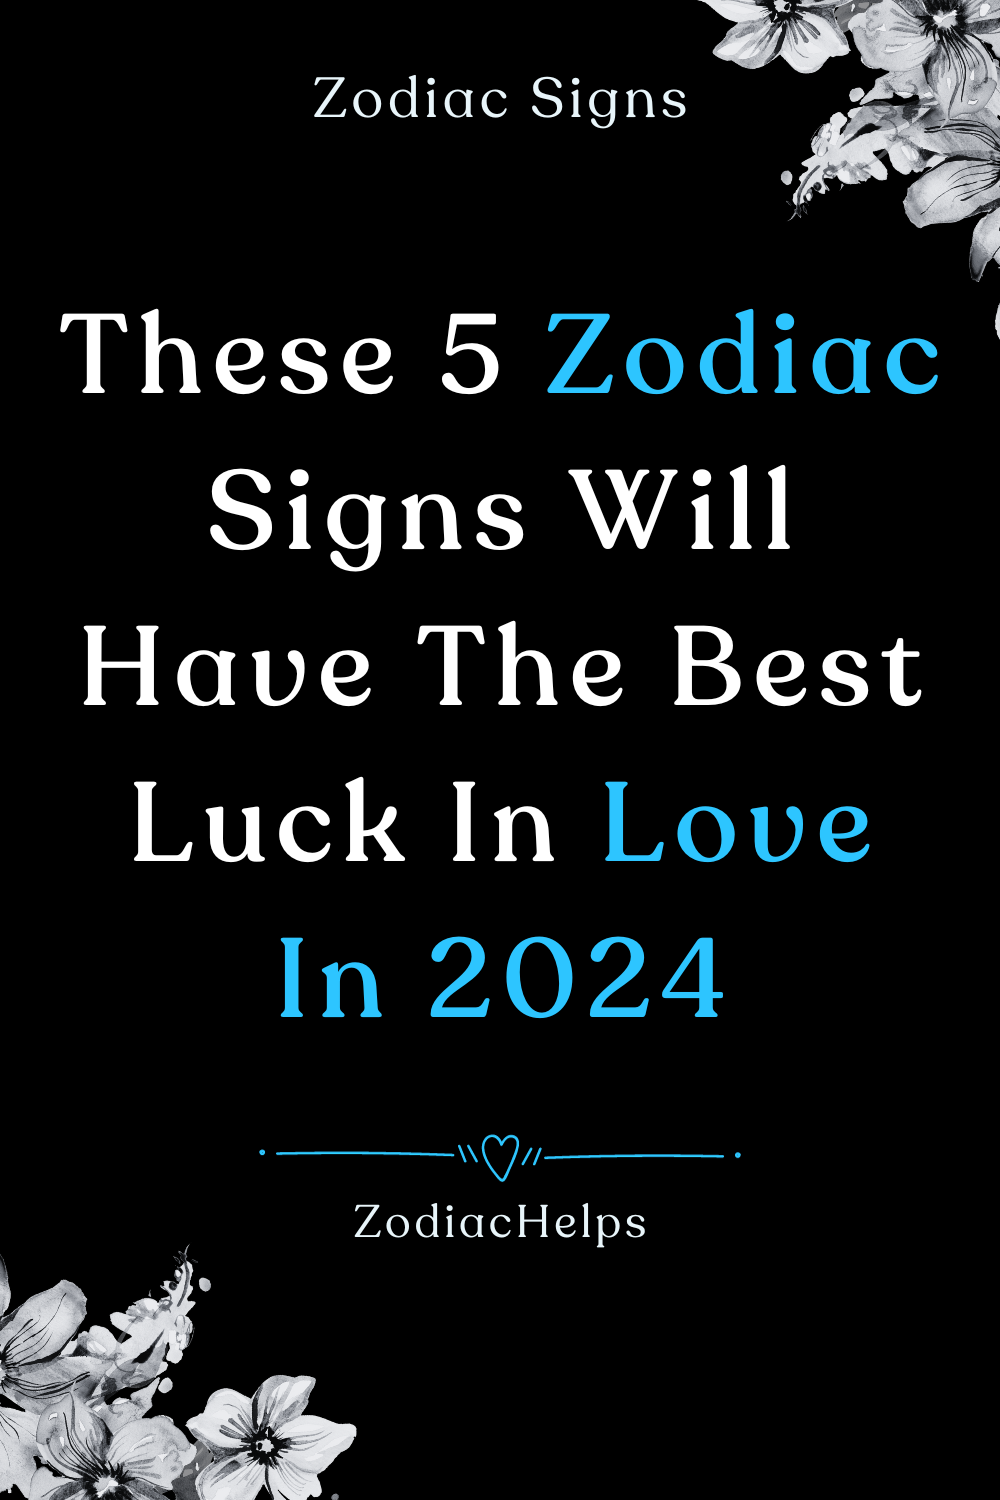 These 5 Zodiac Signs Will Have The Best Luck In Love In 2024 | zodiac Signs